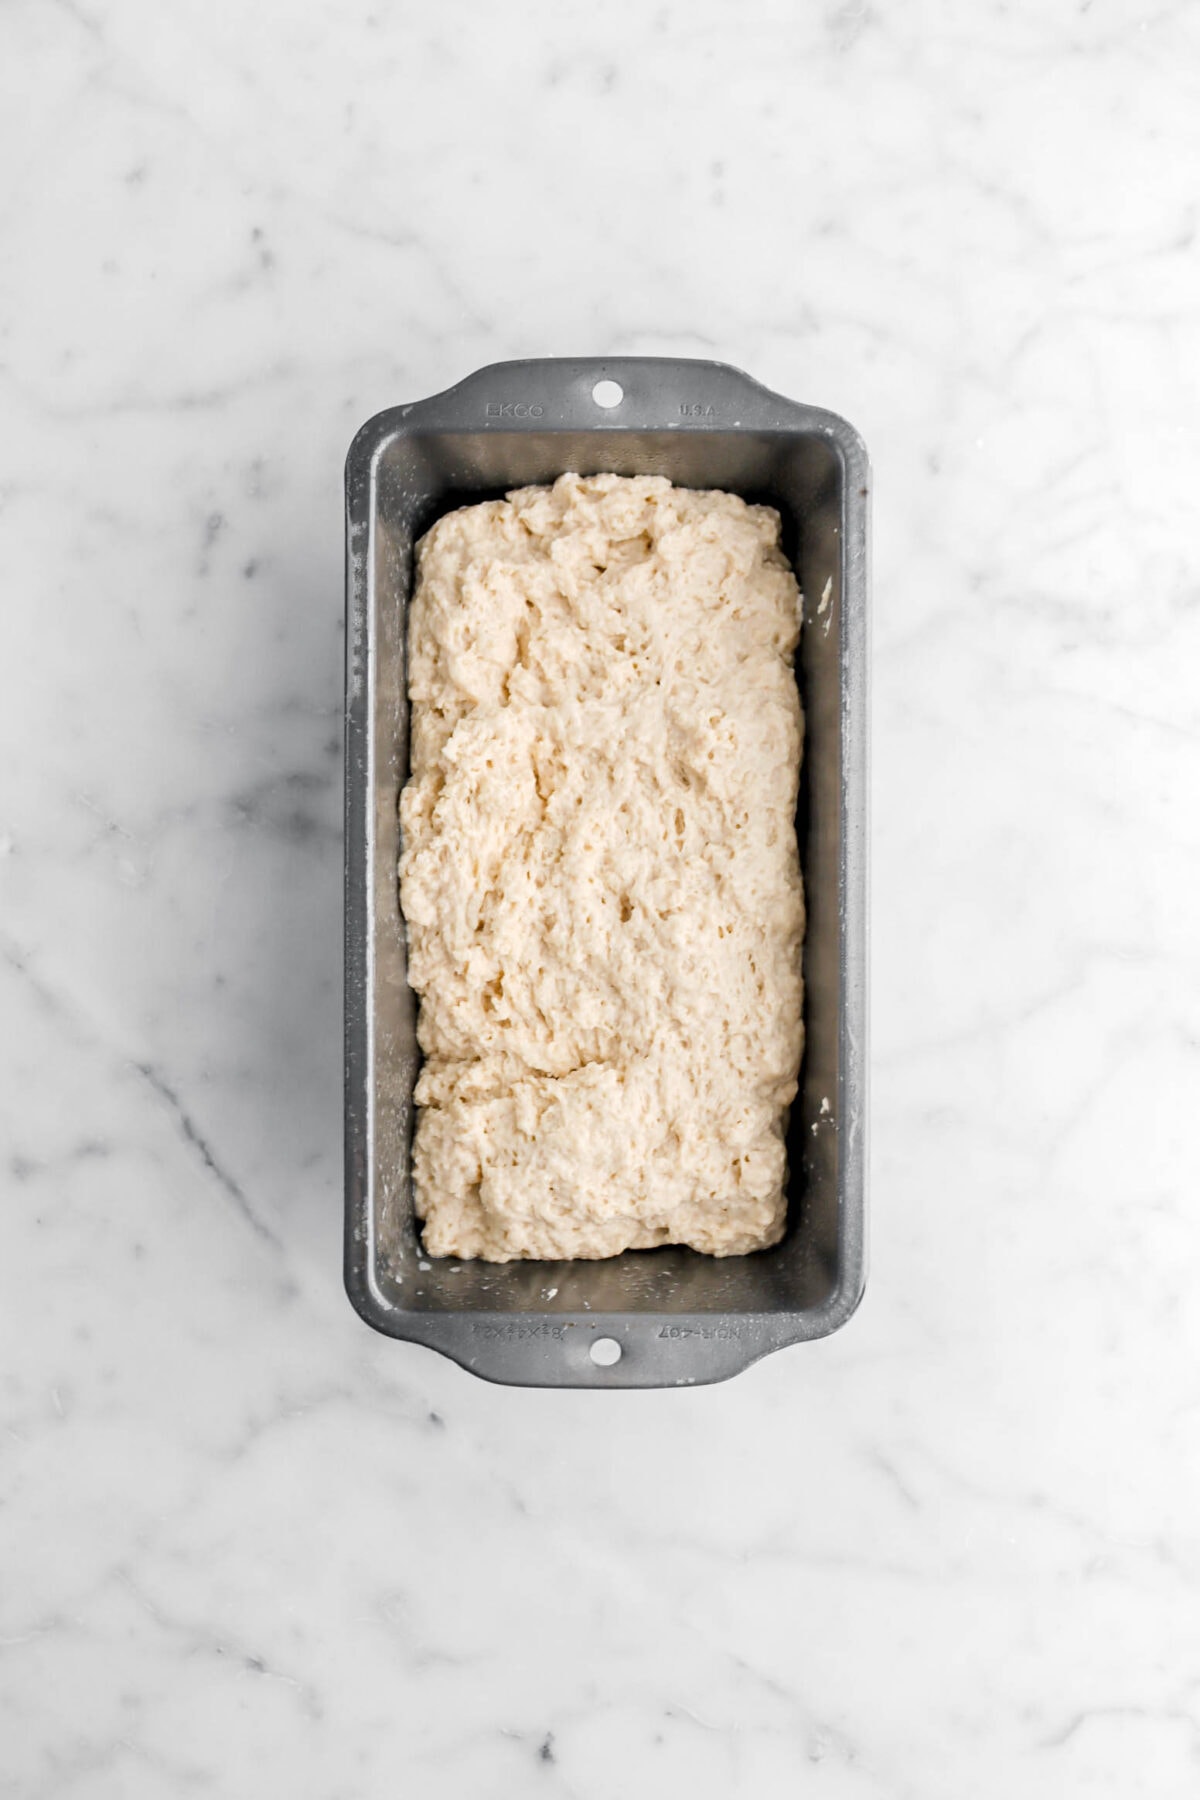 dough in small loaf pan.